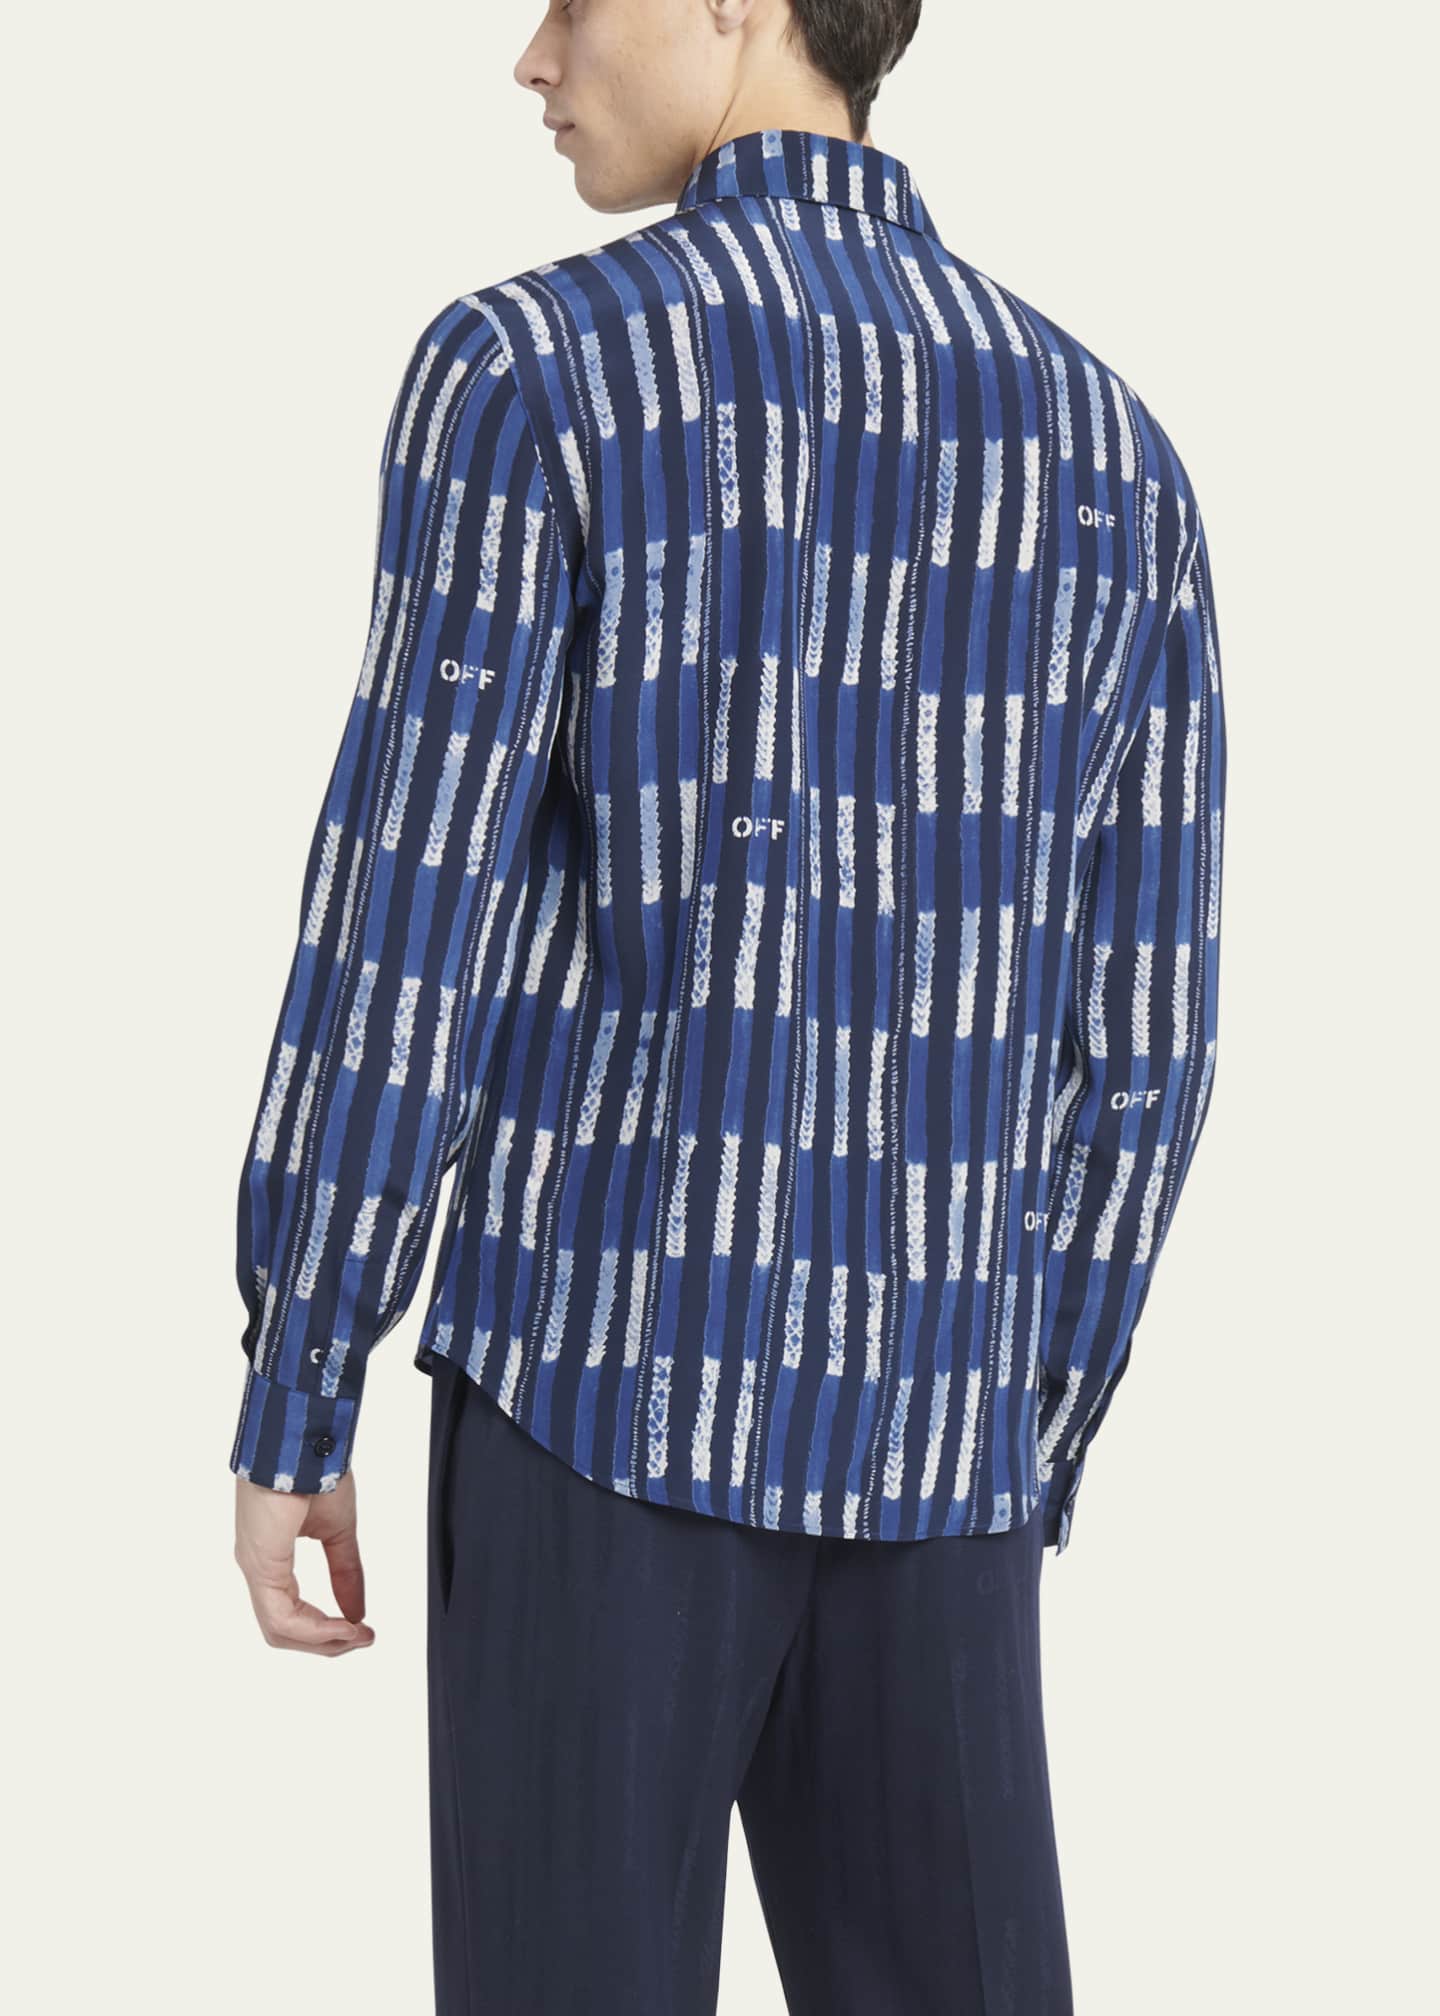 Off-White Men's Silk Shirt with Graphic Print